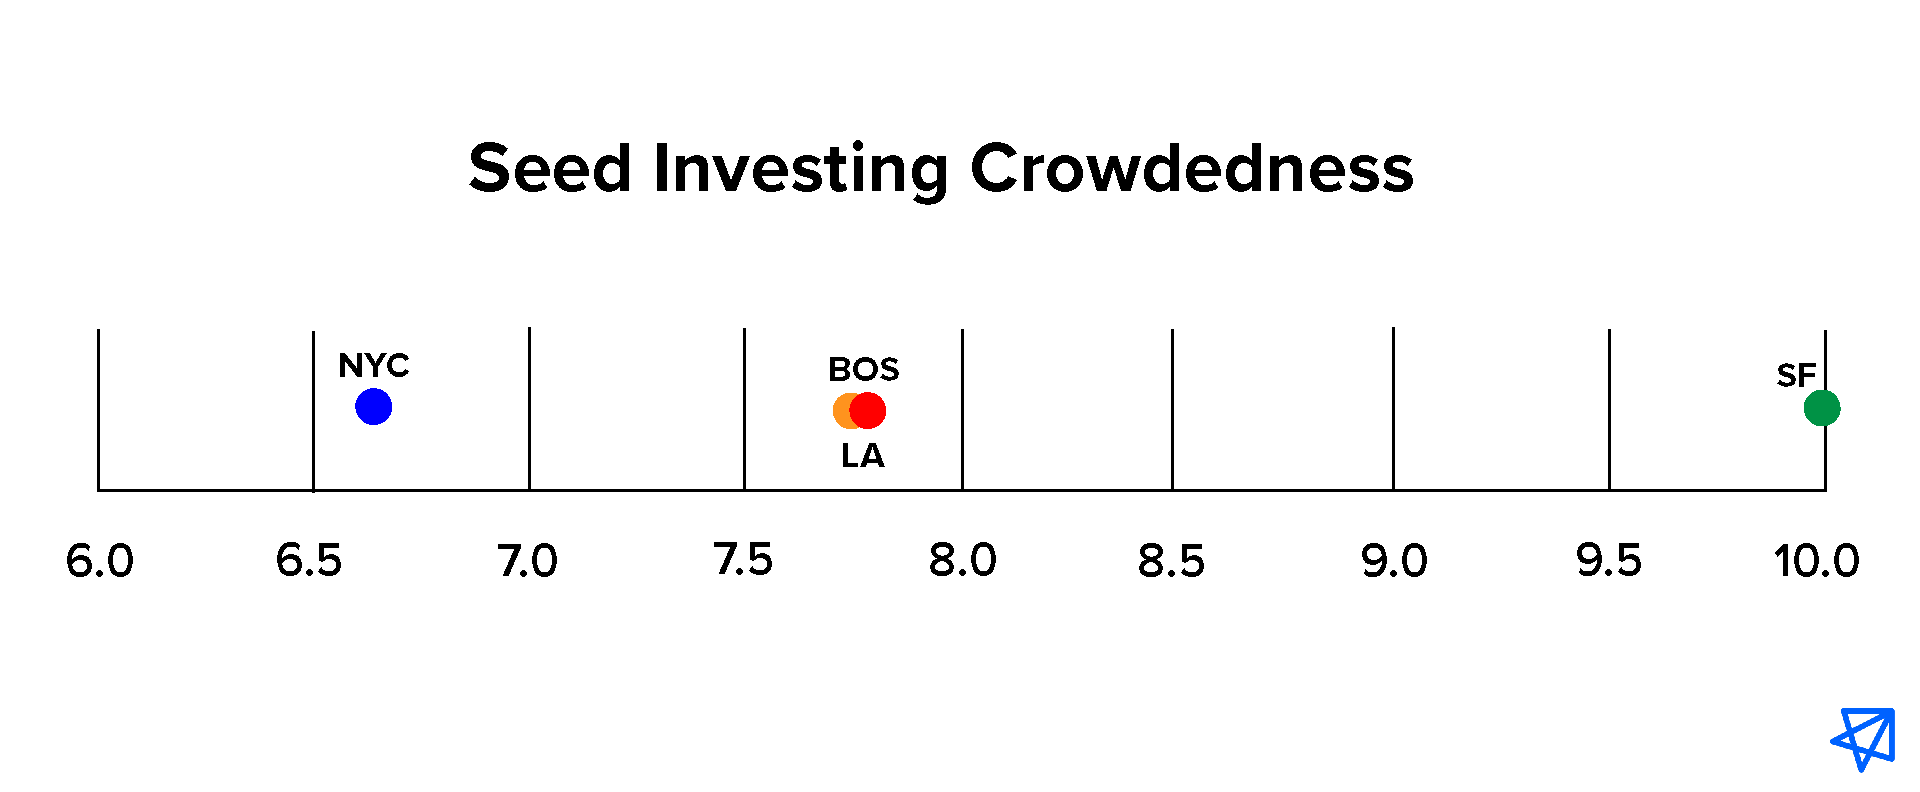 Seed Investing Crowdedness